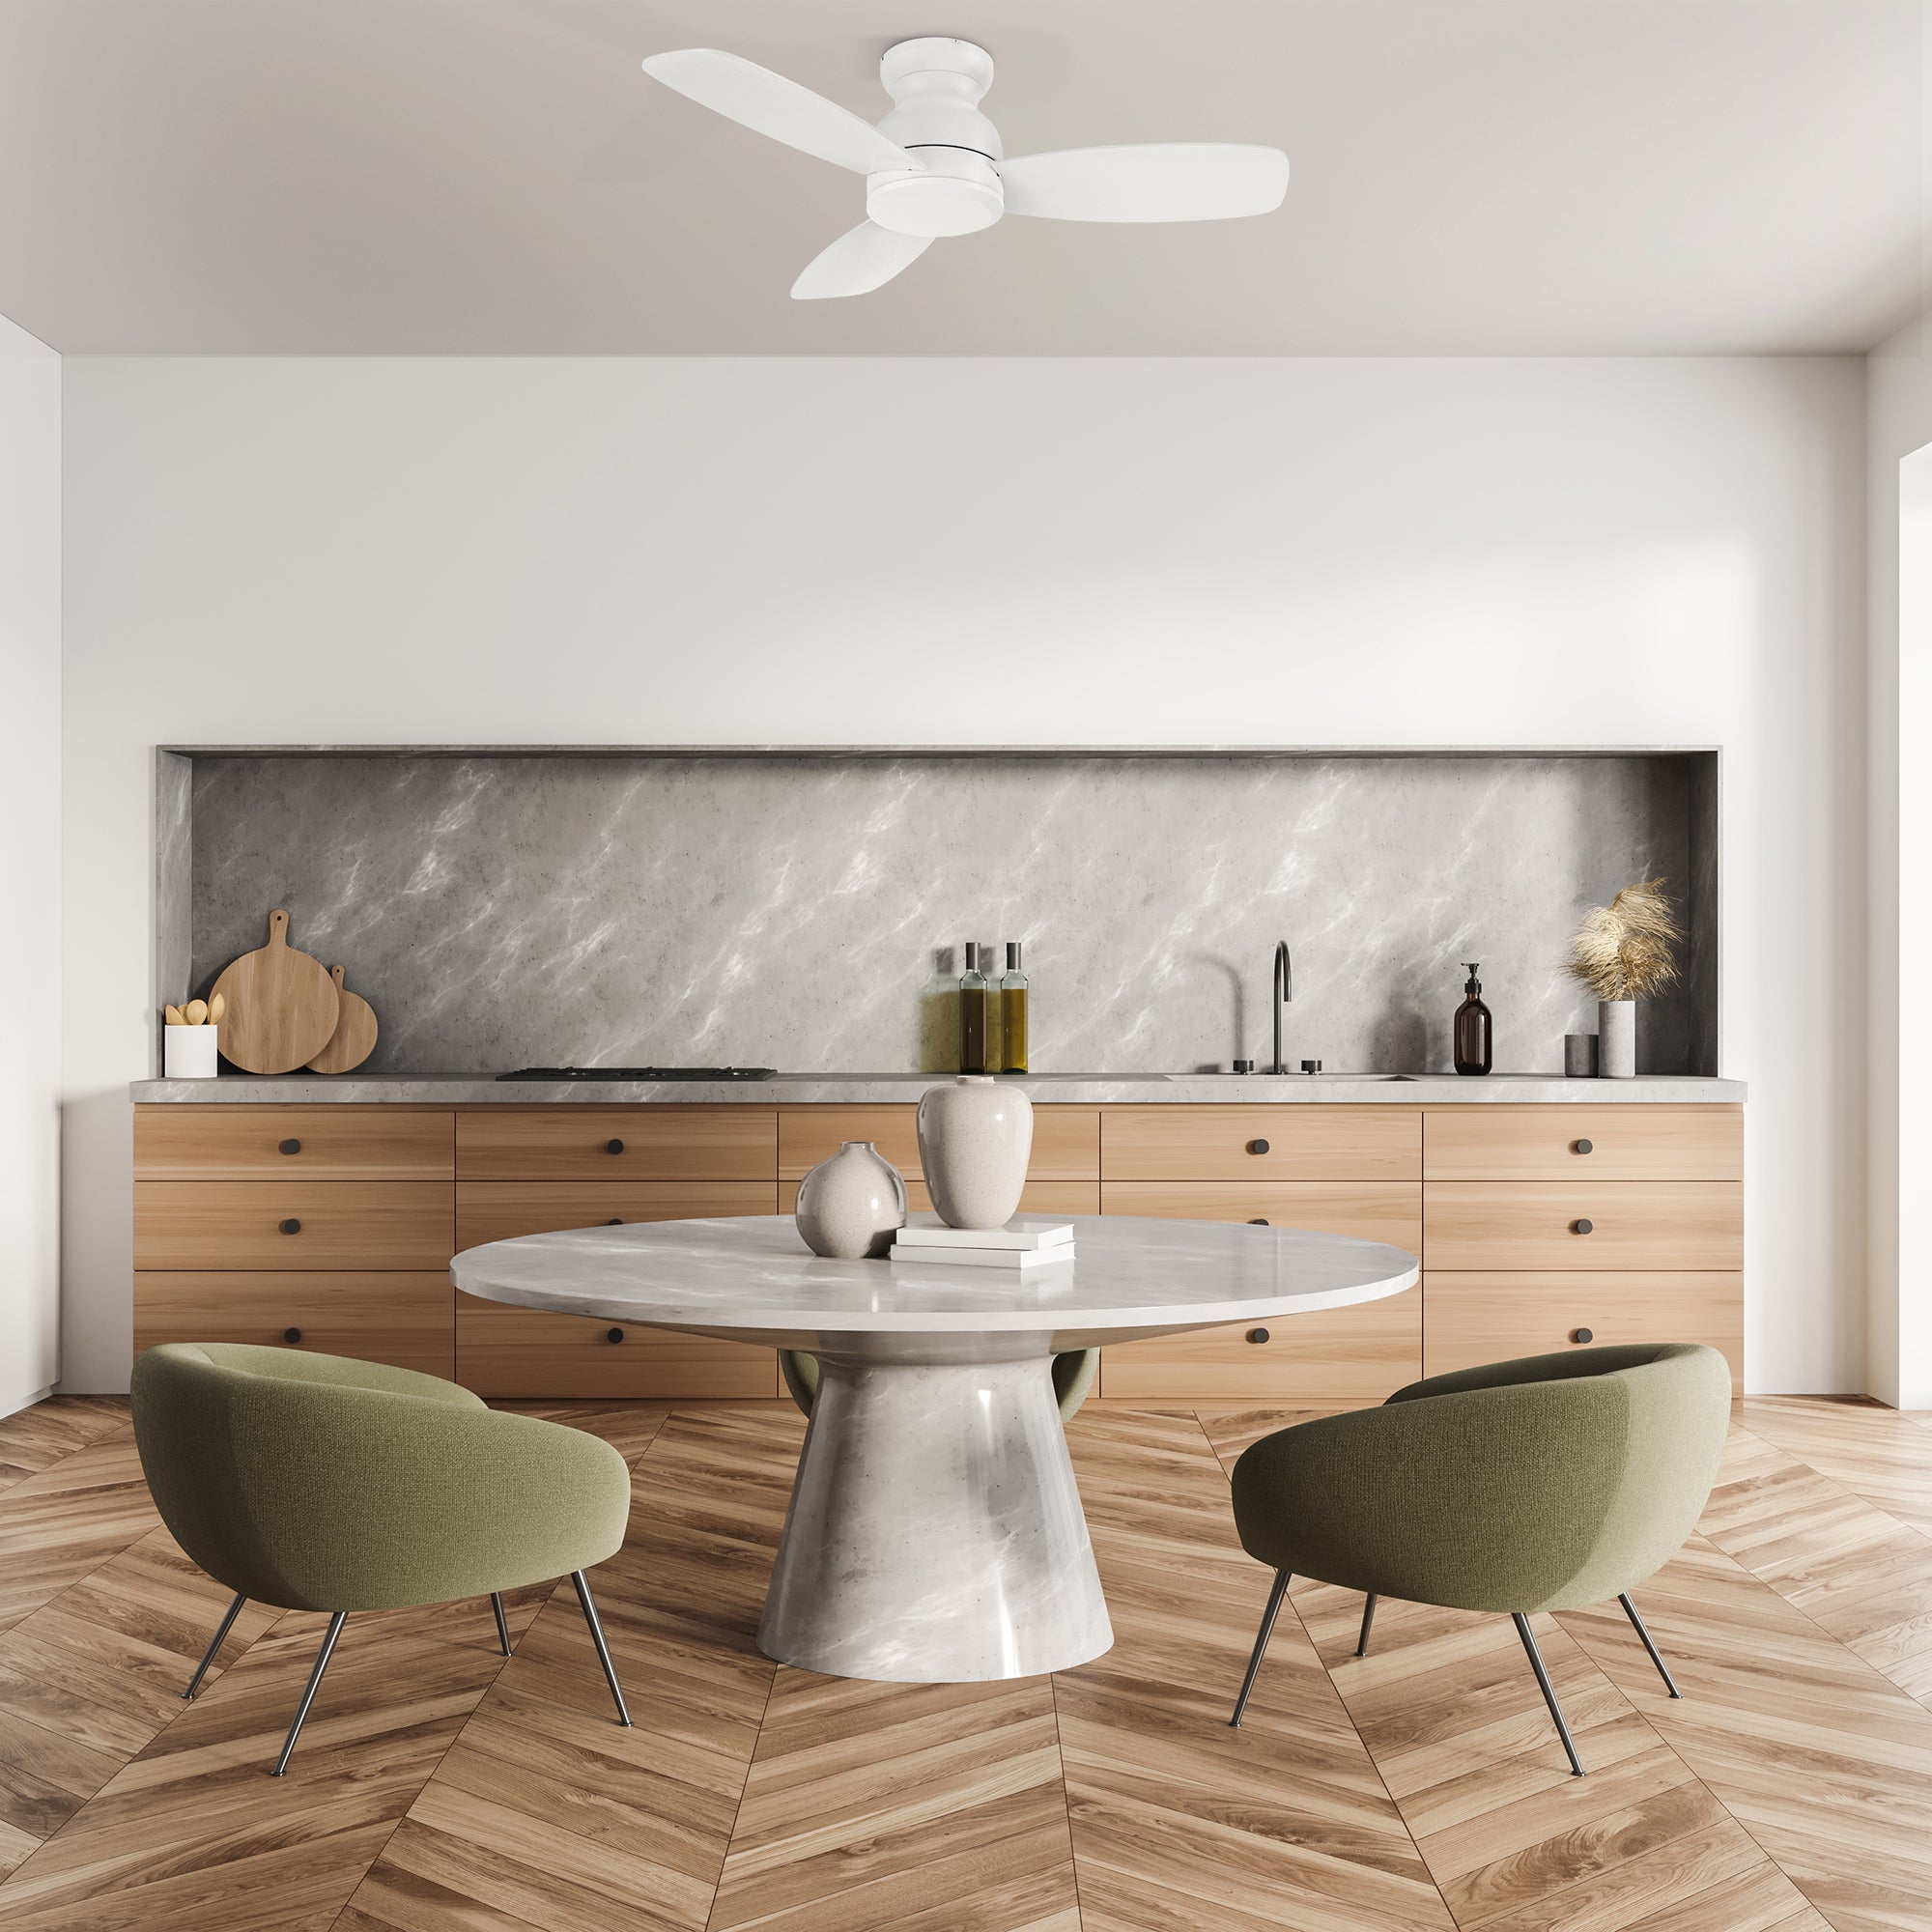 Enjoy a cooling breeze and relaxing controling in an elegant space with the Smafan Osborn 44 inch indoor ceiling fan. The fan is equipped with the latest motor and controling technology with a stylish exterior to suit the décor of your preference. The fan features a charming wood / white finish and sleek blades to cooling up your indoor living spaces. 